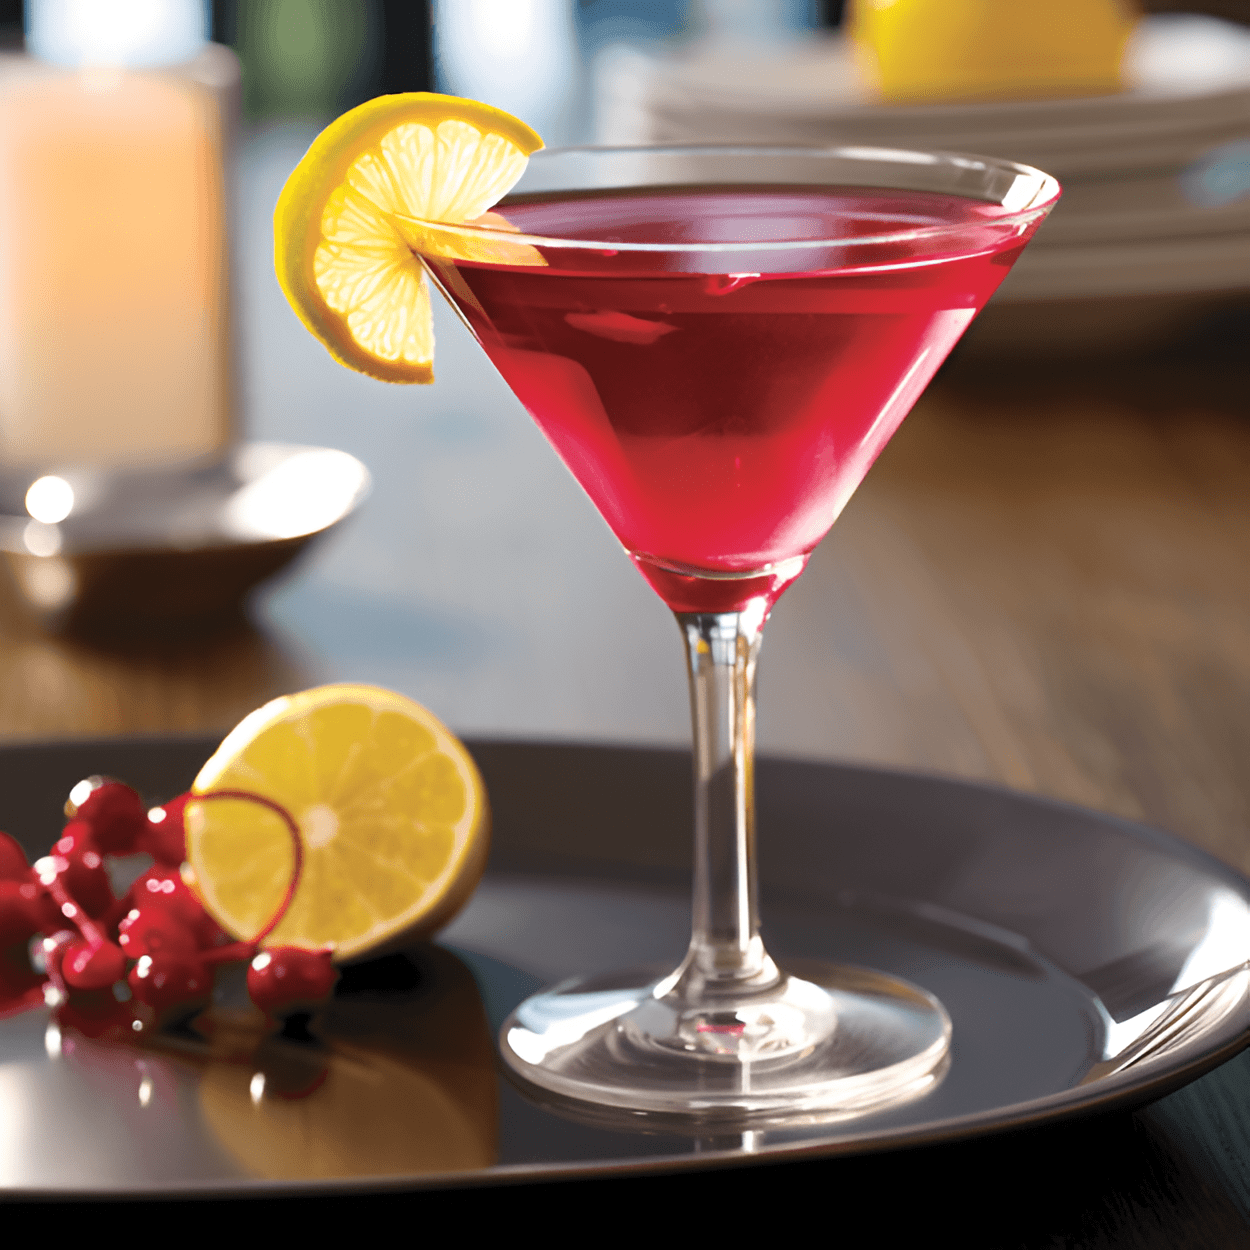 Elderberry Martini Cocktail Recipe - The Elderberry Martini is a harmonious blend of sweet, tart, and strong. The elderberry syrup lends a fruity sweetness, balanced by the tartness of fresh lemon juice. The vodka provides a strong, clean base that allows the elderberry flavor to shine.